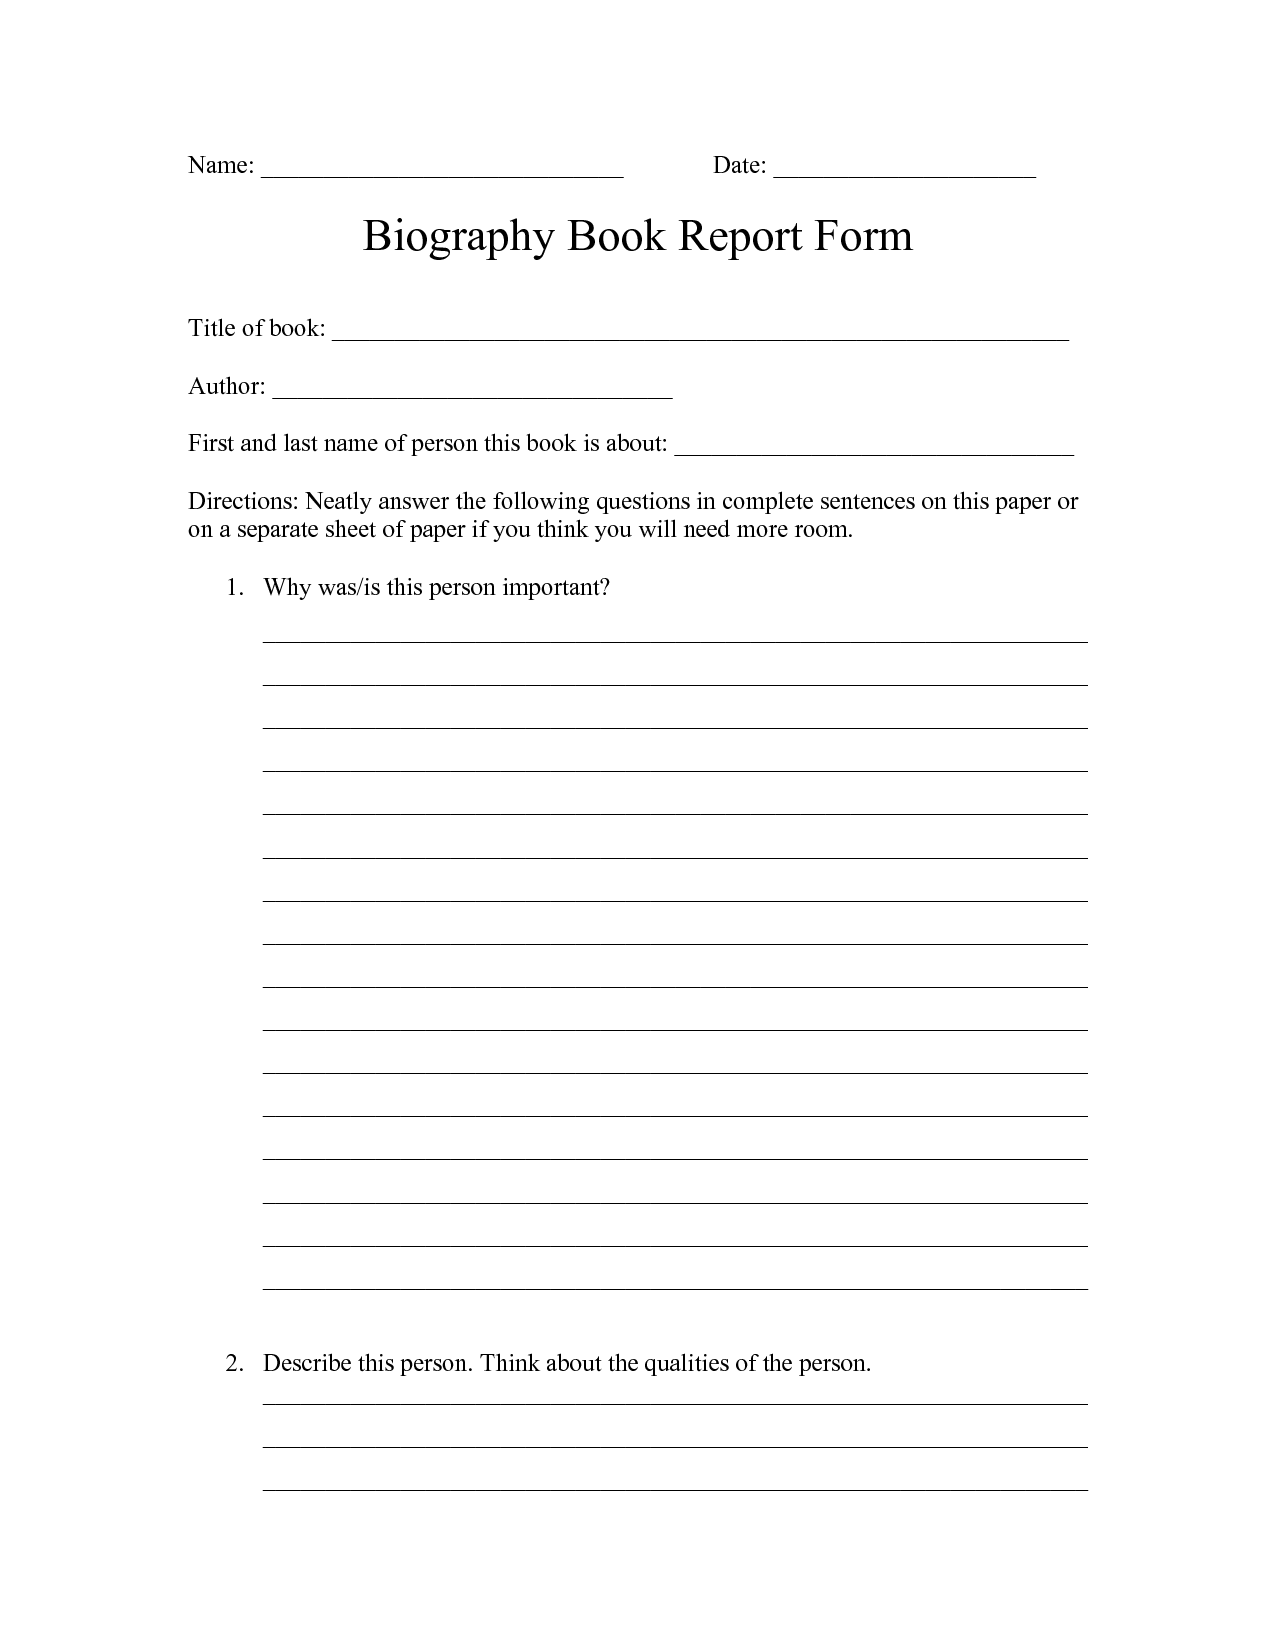 8 Best Images of Biography Book Report Form Printable 4th Grade